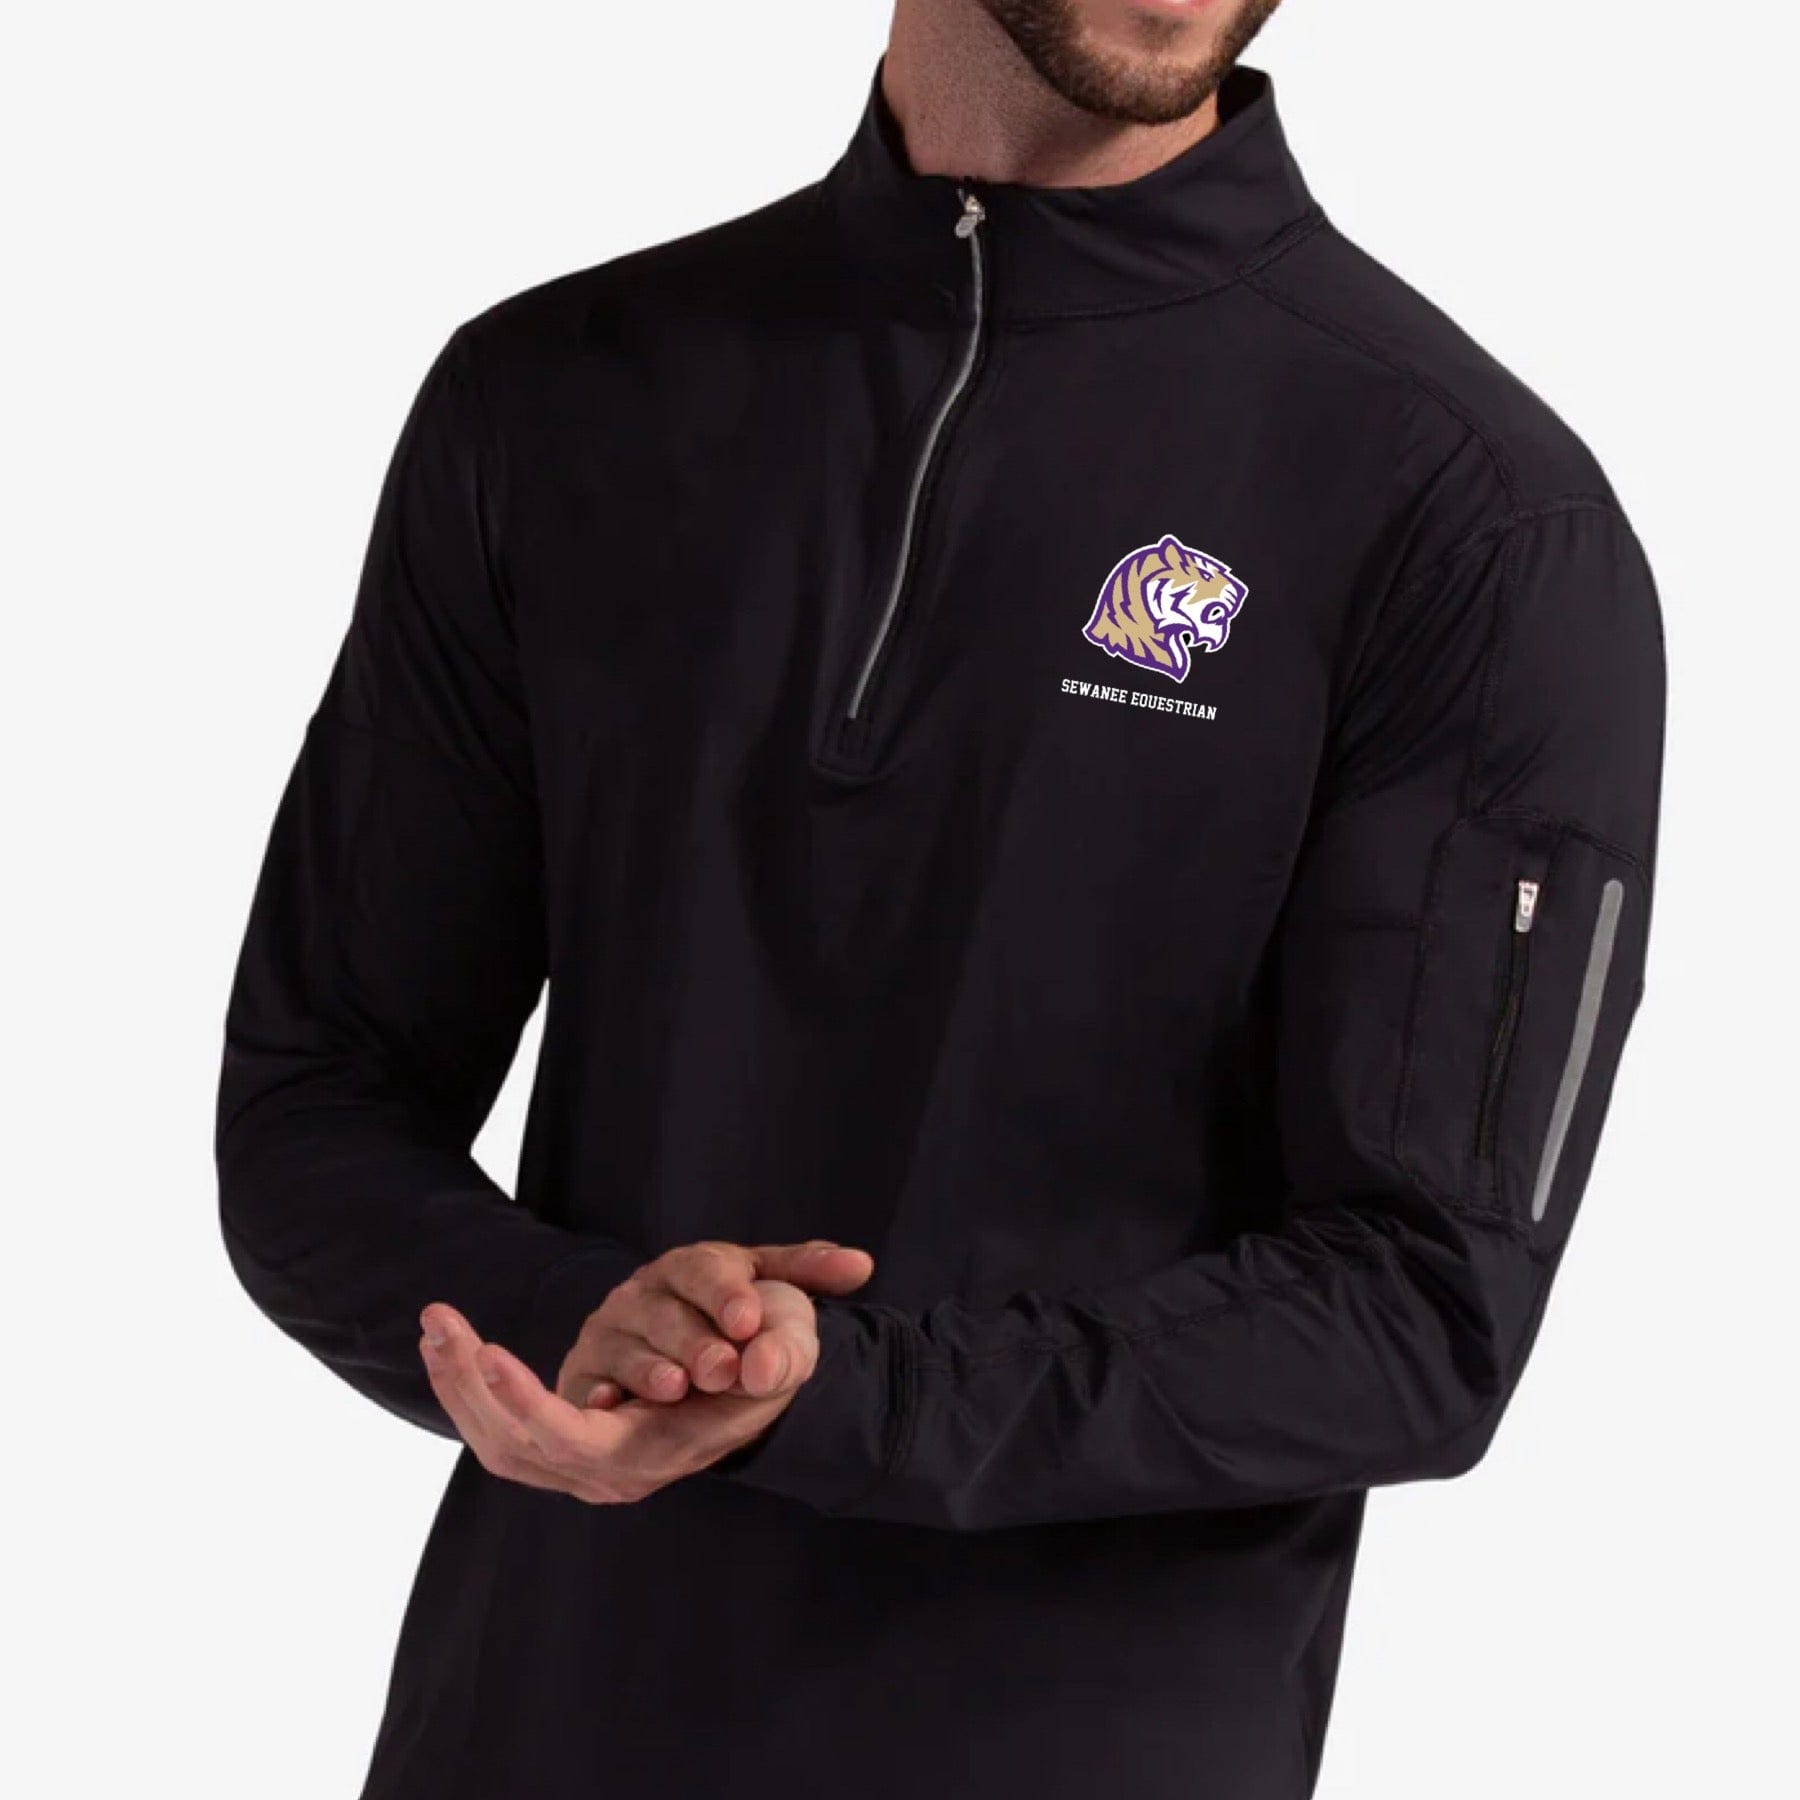 Equestrian Team Apparel Sewanee College- Sun Shirt Men’s equestrian team apparel online tack store mobile tack store custom farm apparel custom show stable clothing equestrian lifestyle horse show clothing riding clothes horses equestrian tack store